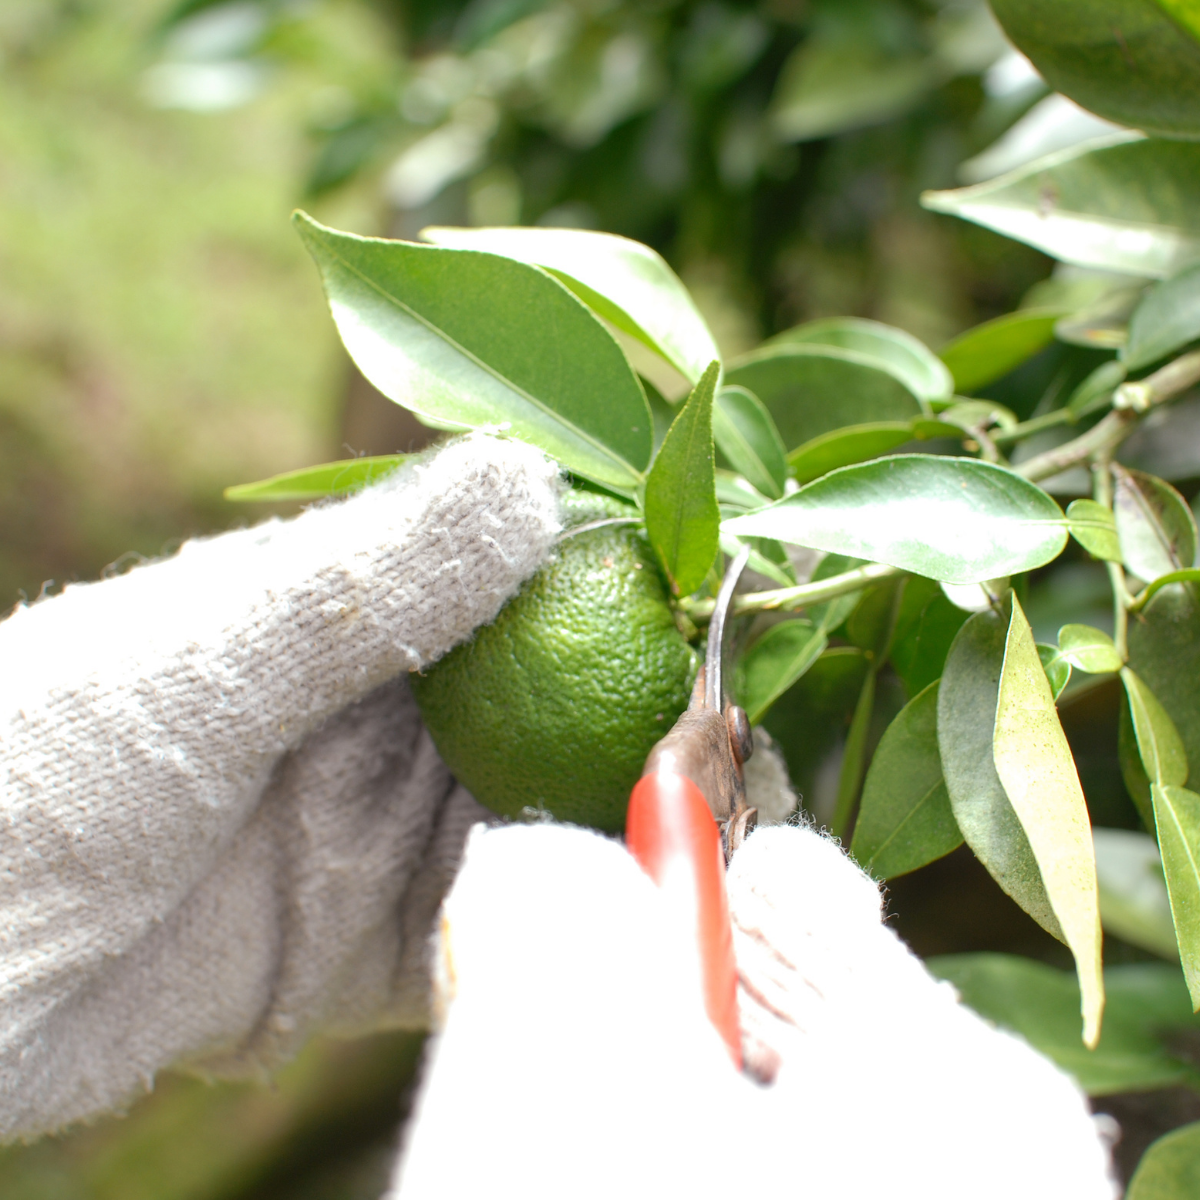 A man cutting off a yuzu fruit from tree with scissors